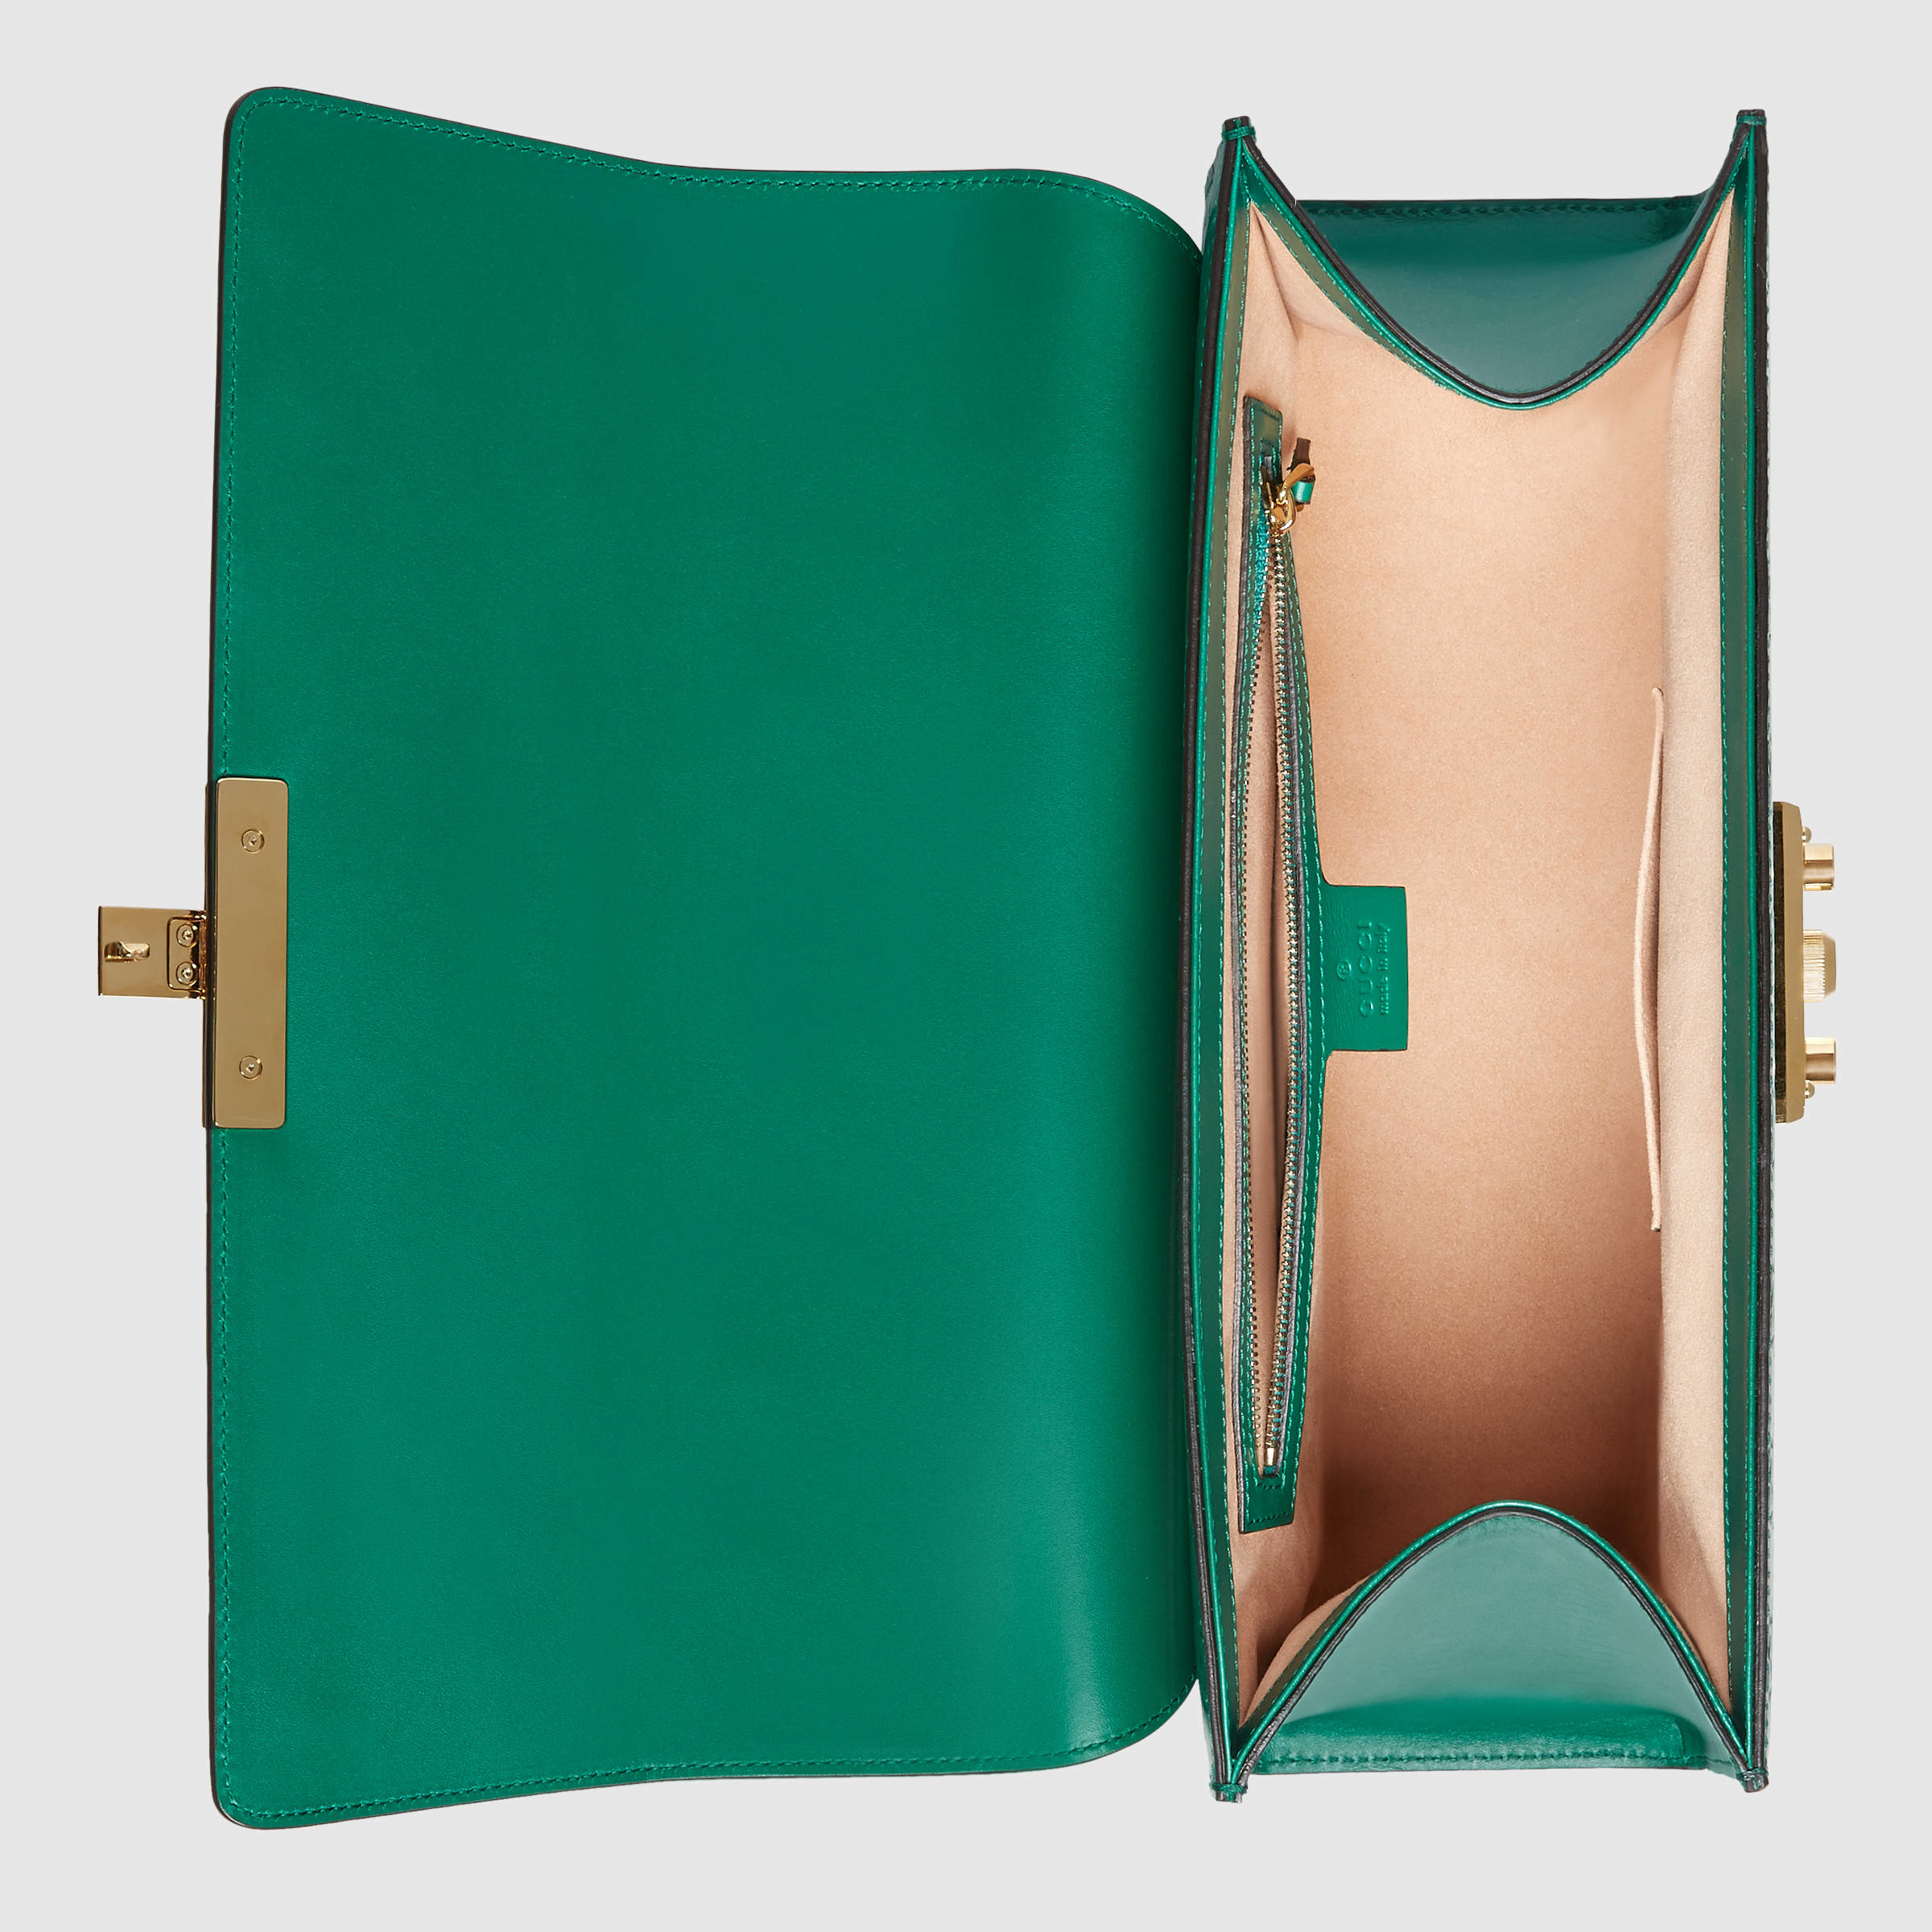 Lyst - Gucci Padlock Signature Top Handle Leather Bag in Green